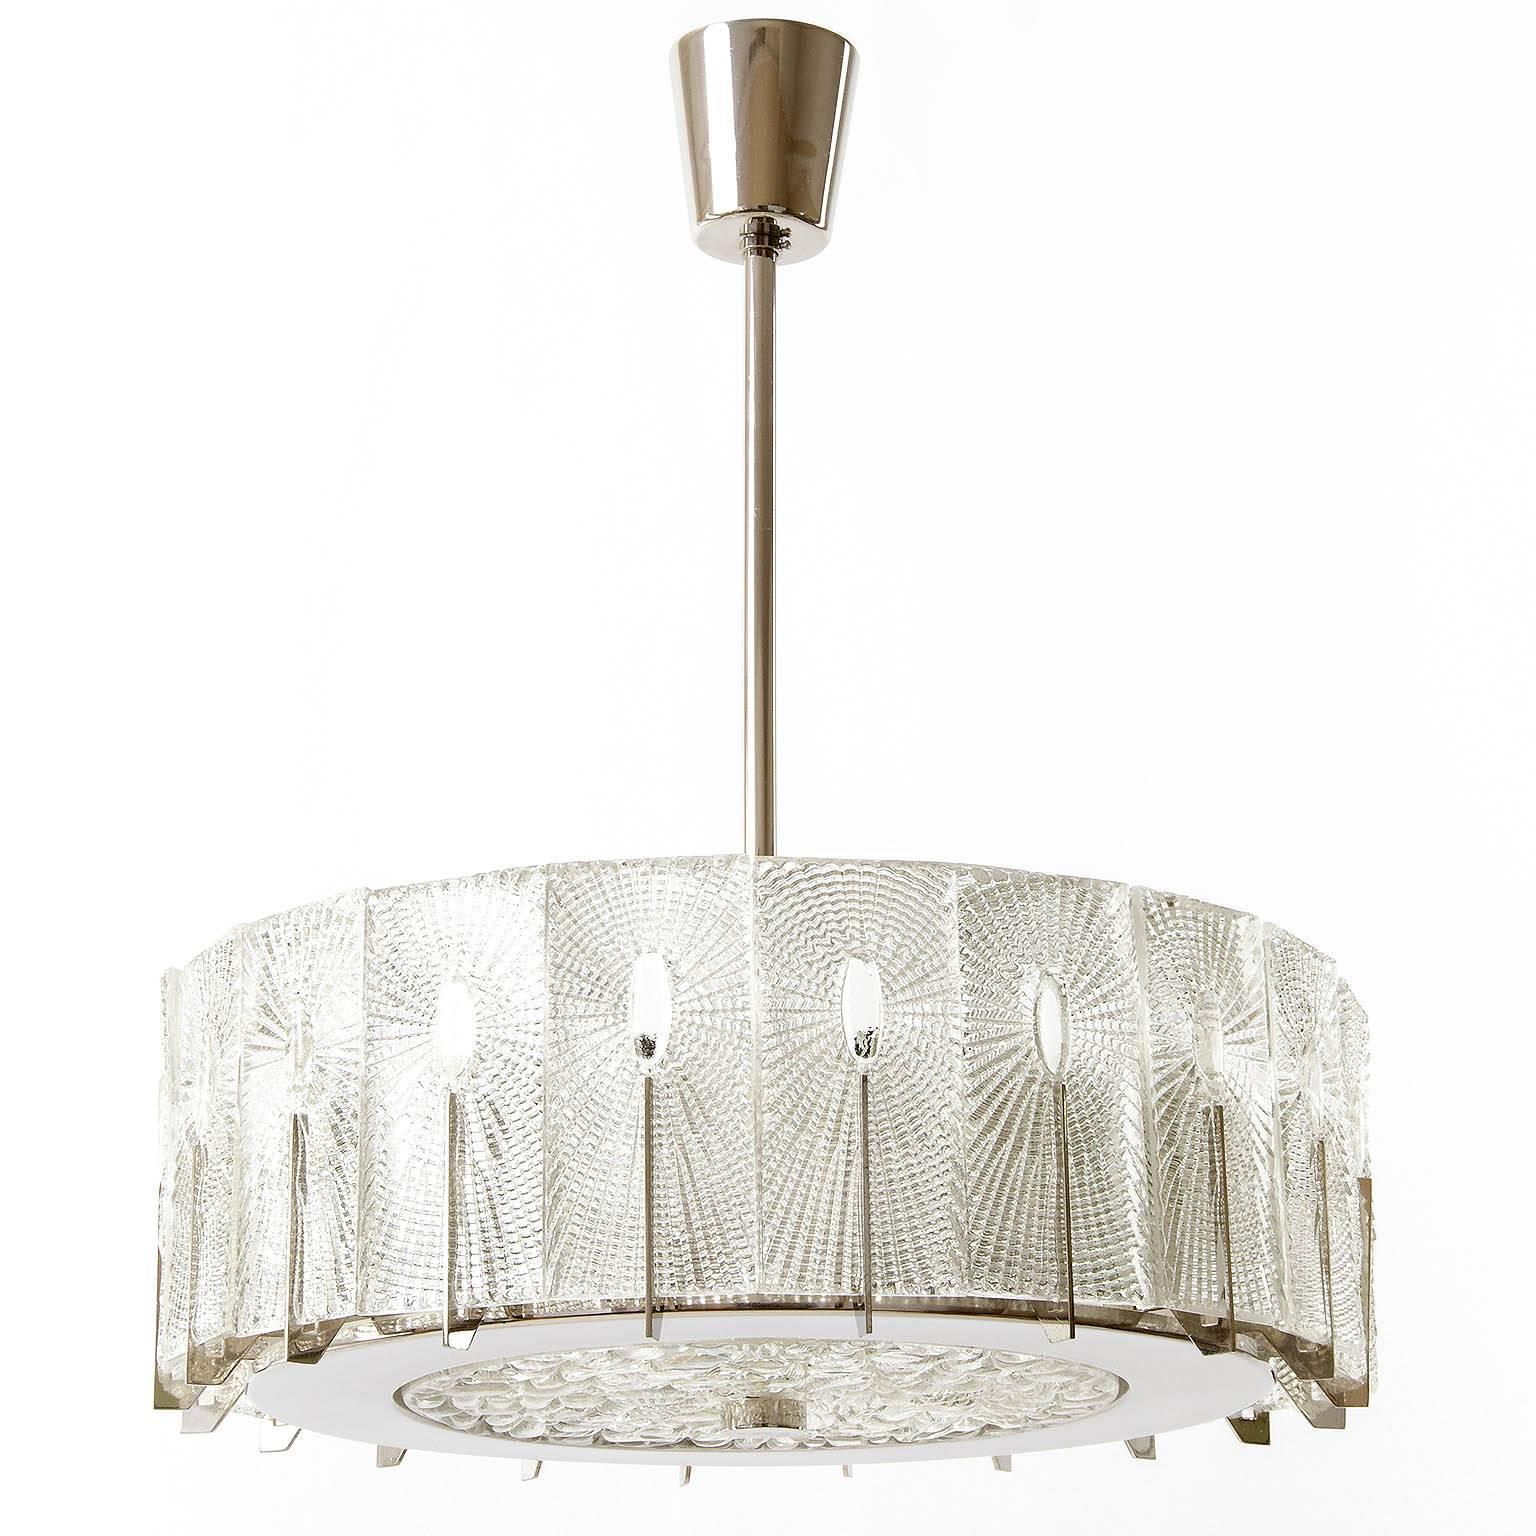 Mid-Century Modern Pair of Chandeliers or Flush Mount Lights by Rupert Nikoll, Glass Nickel, 1950s